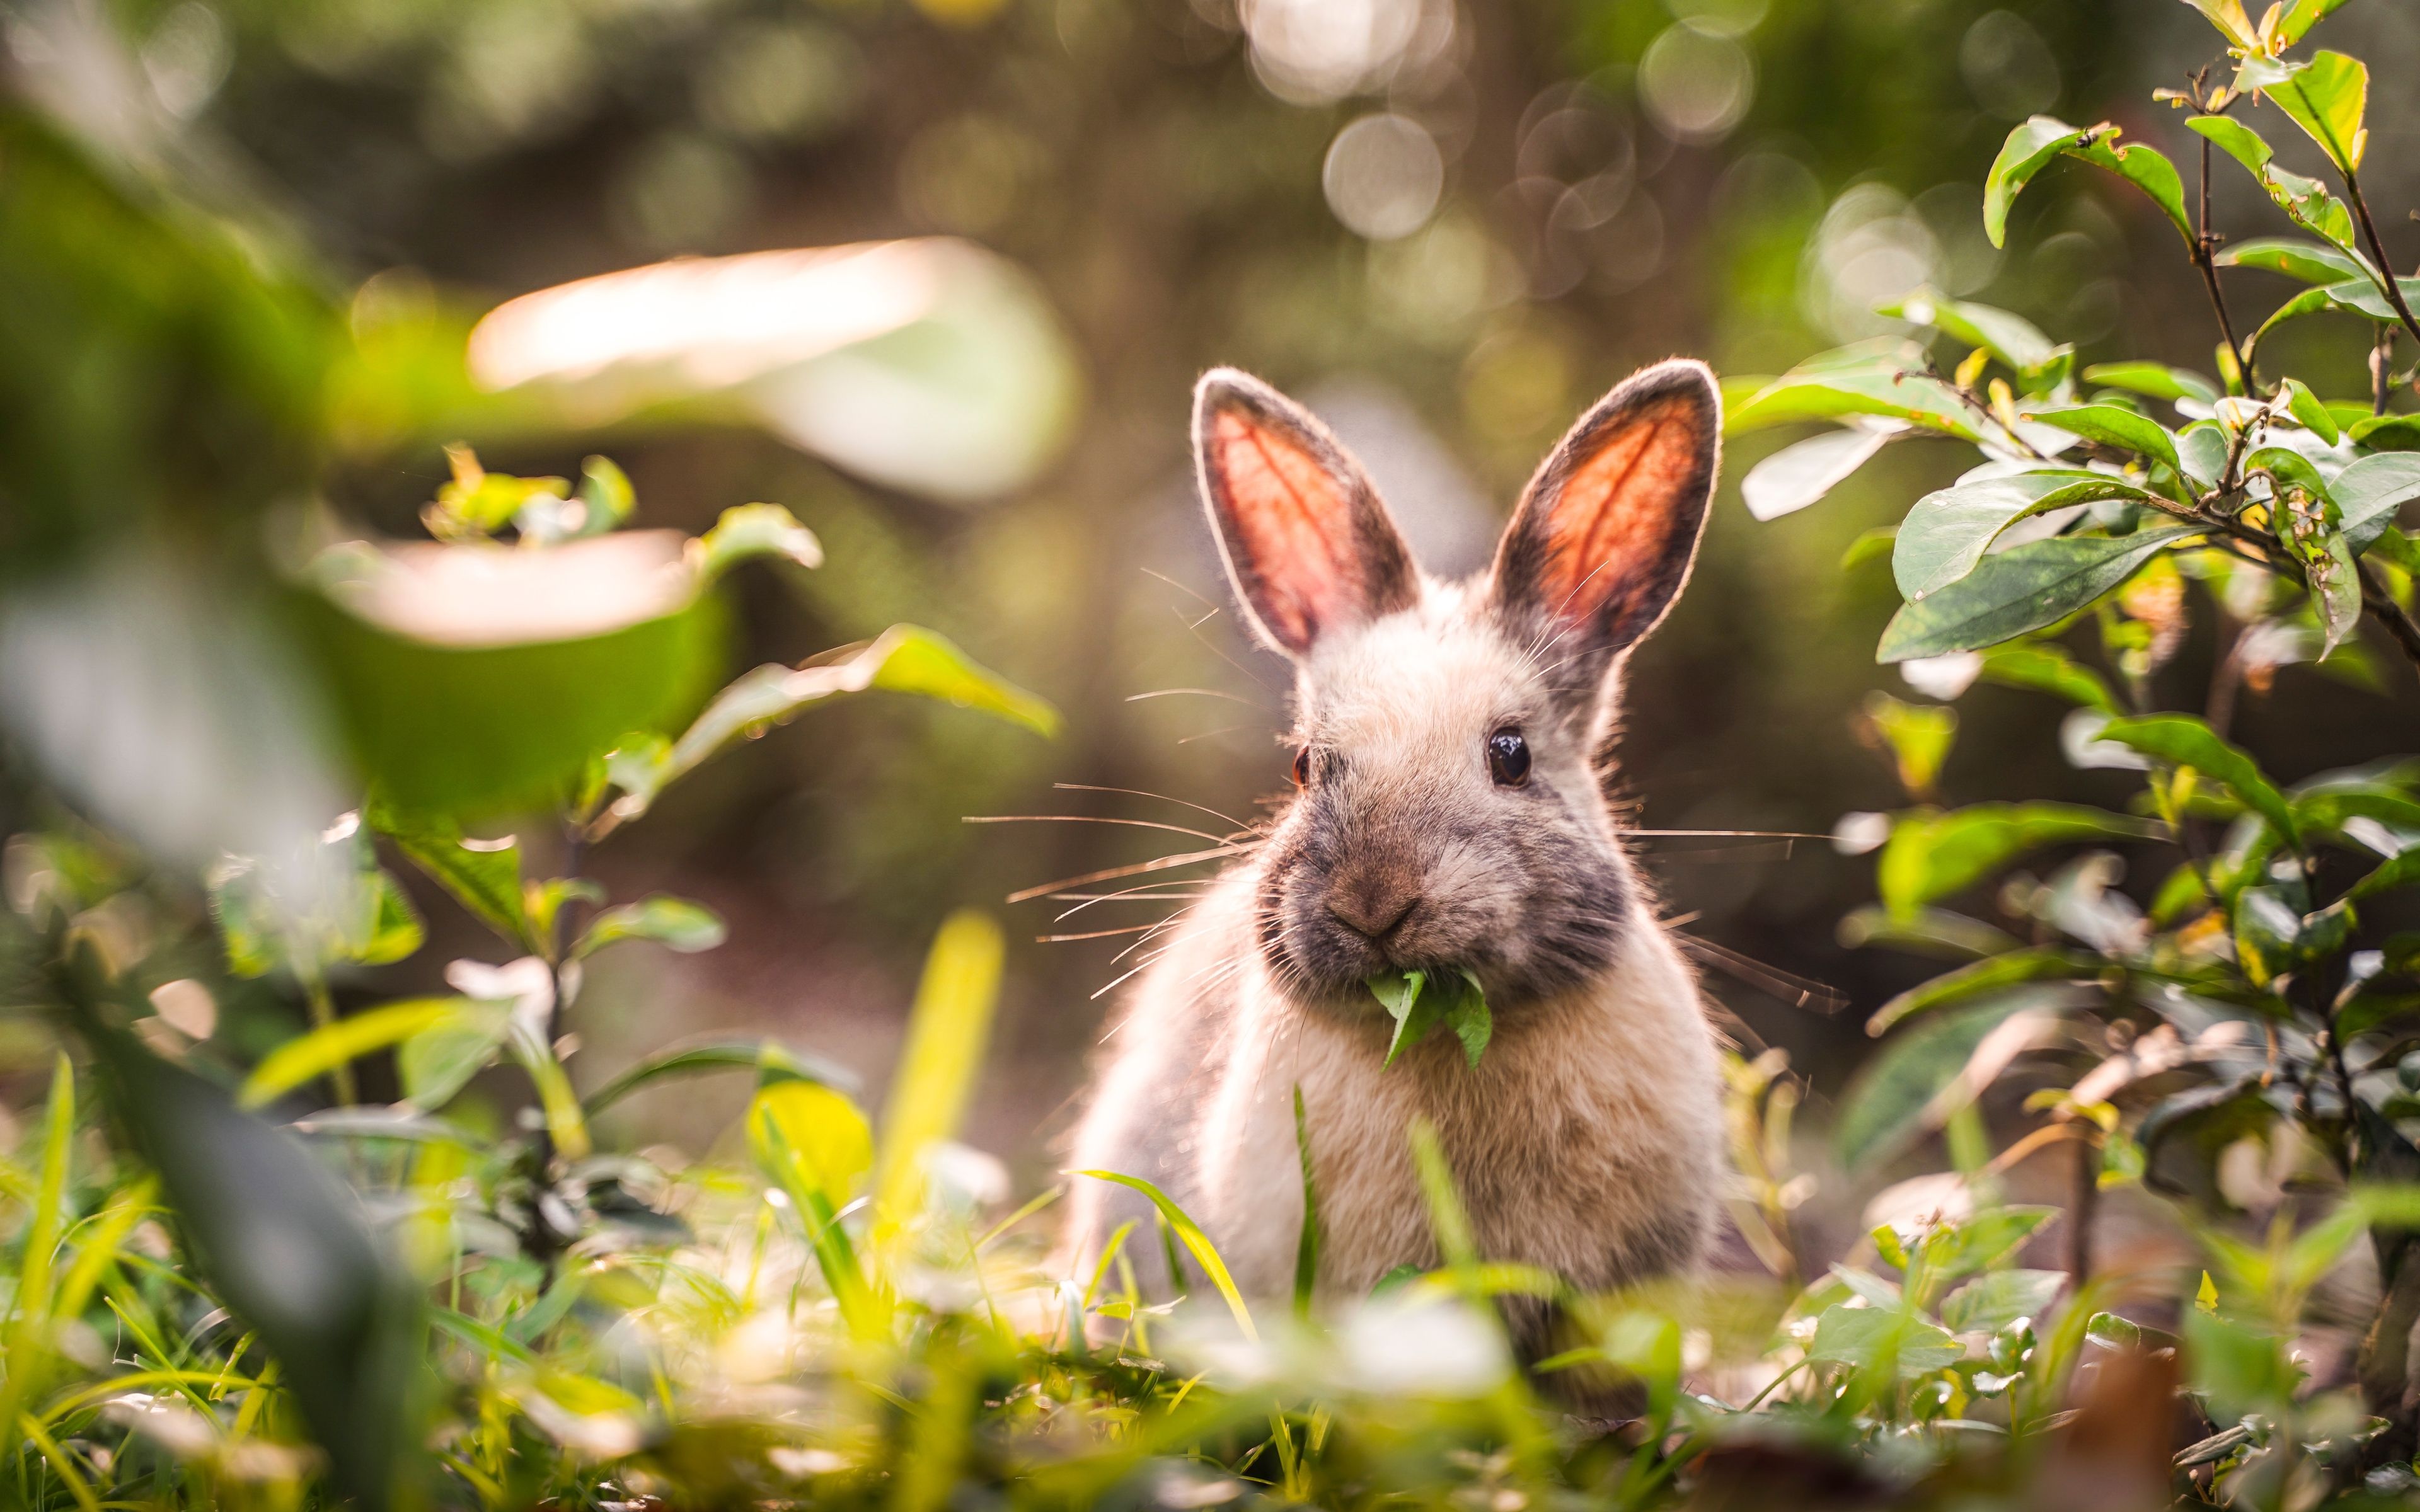 Download wallpaper 4k, rabbit in forest, bokeh, summer, cute animals, little rabbit, bunny, pets, rabbits, cute bunny for desktop with resolution 3840x2400. High Quality HD picture wallpaper